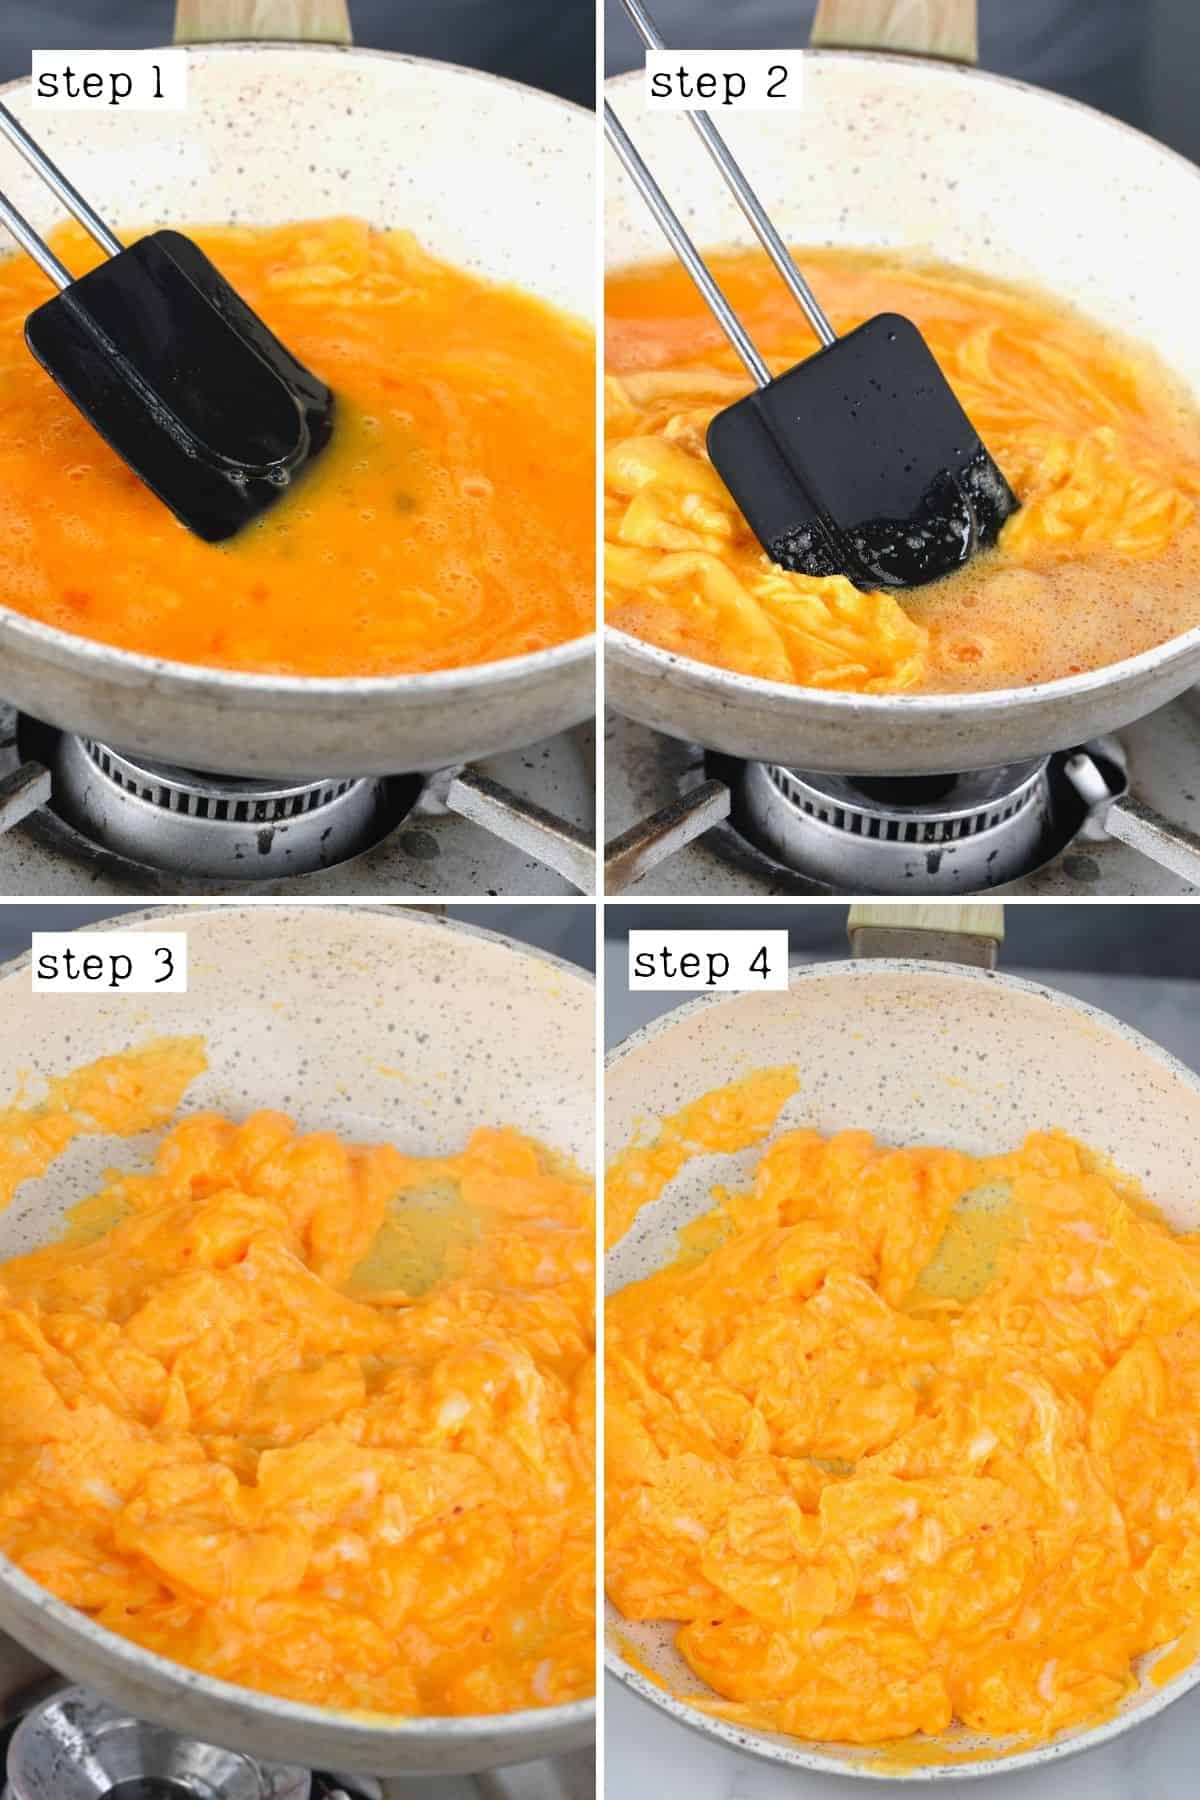 Steps for cooking scrambled eggs